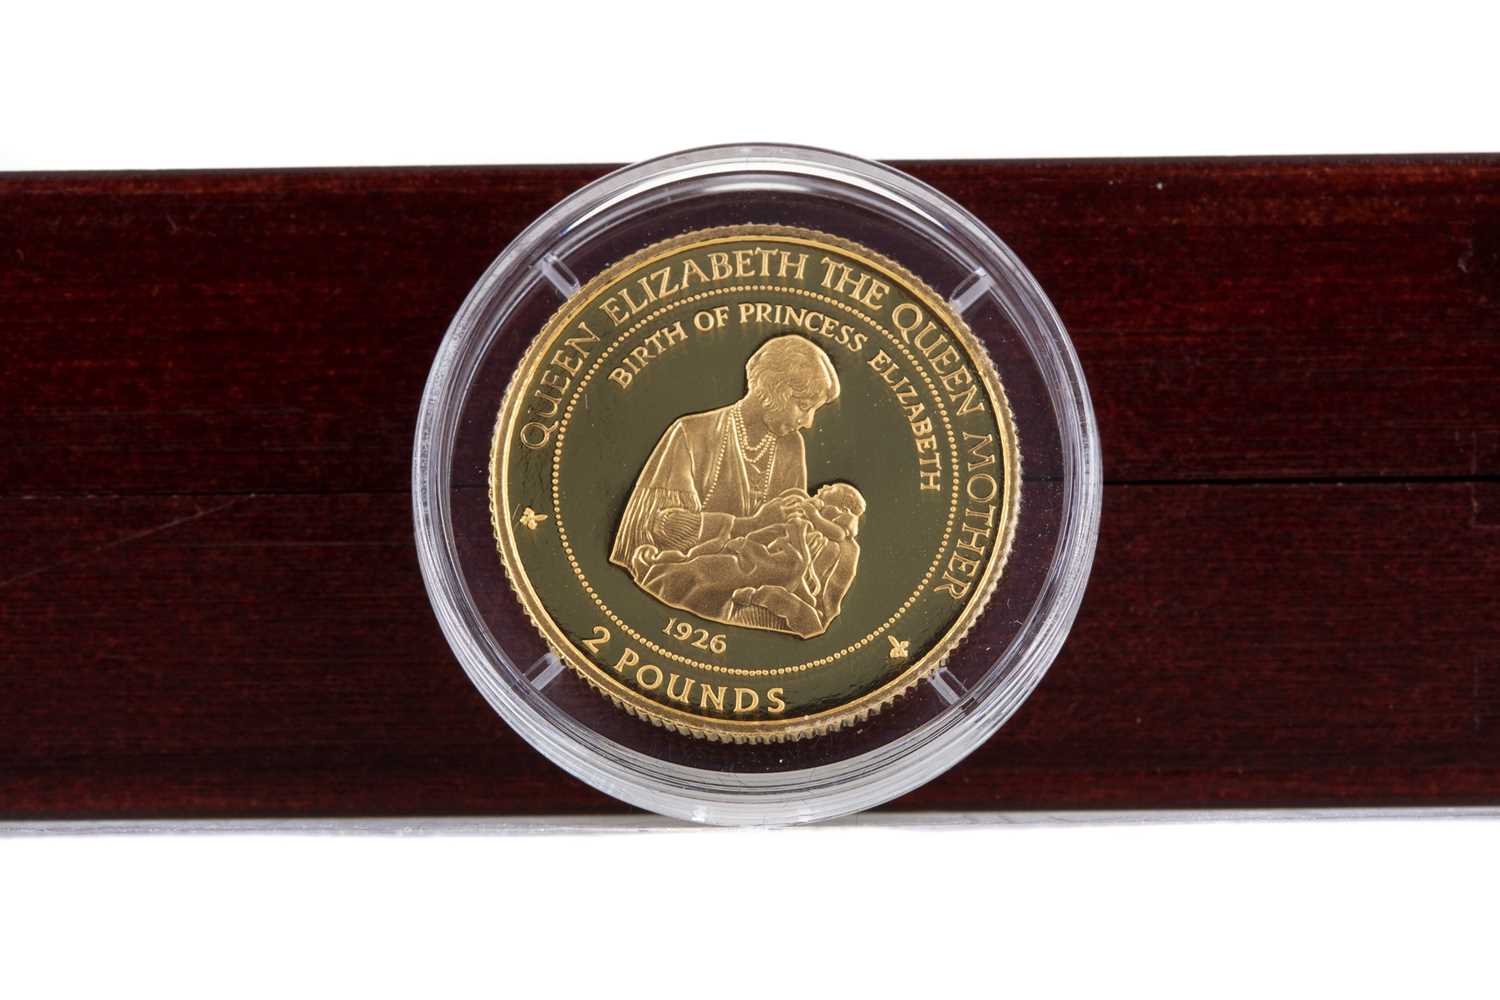 Lot 59 - THE 1998 FALKLAND ISLANDS QUEEN ELIZABETH THE QUEEN MOTHER 'LADY OF THE CENTURY' GOLD PROOF TWO POUND COIN